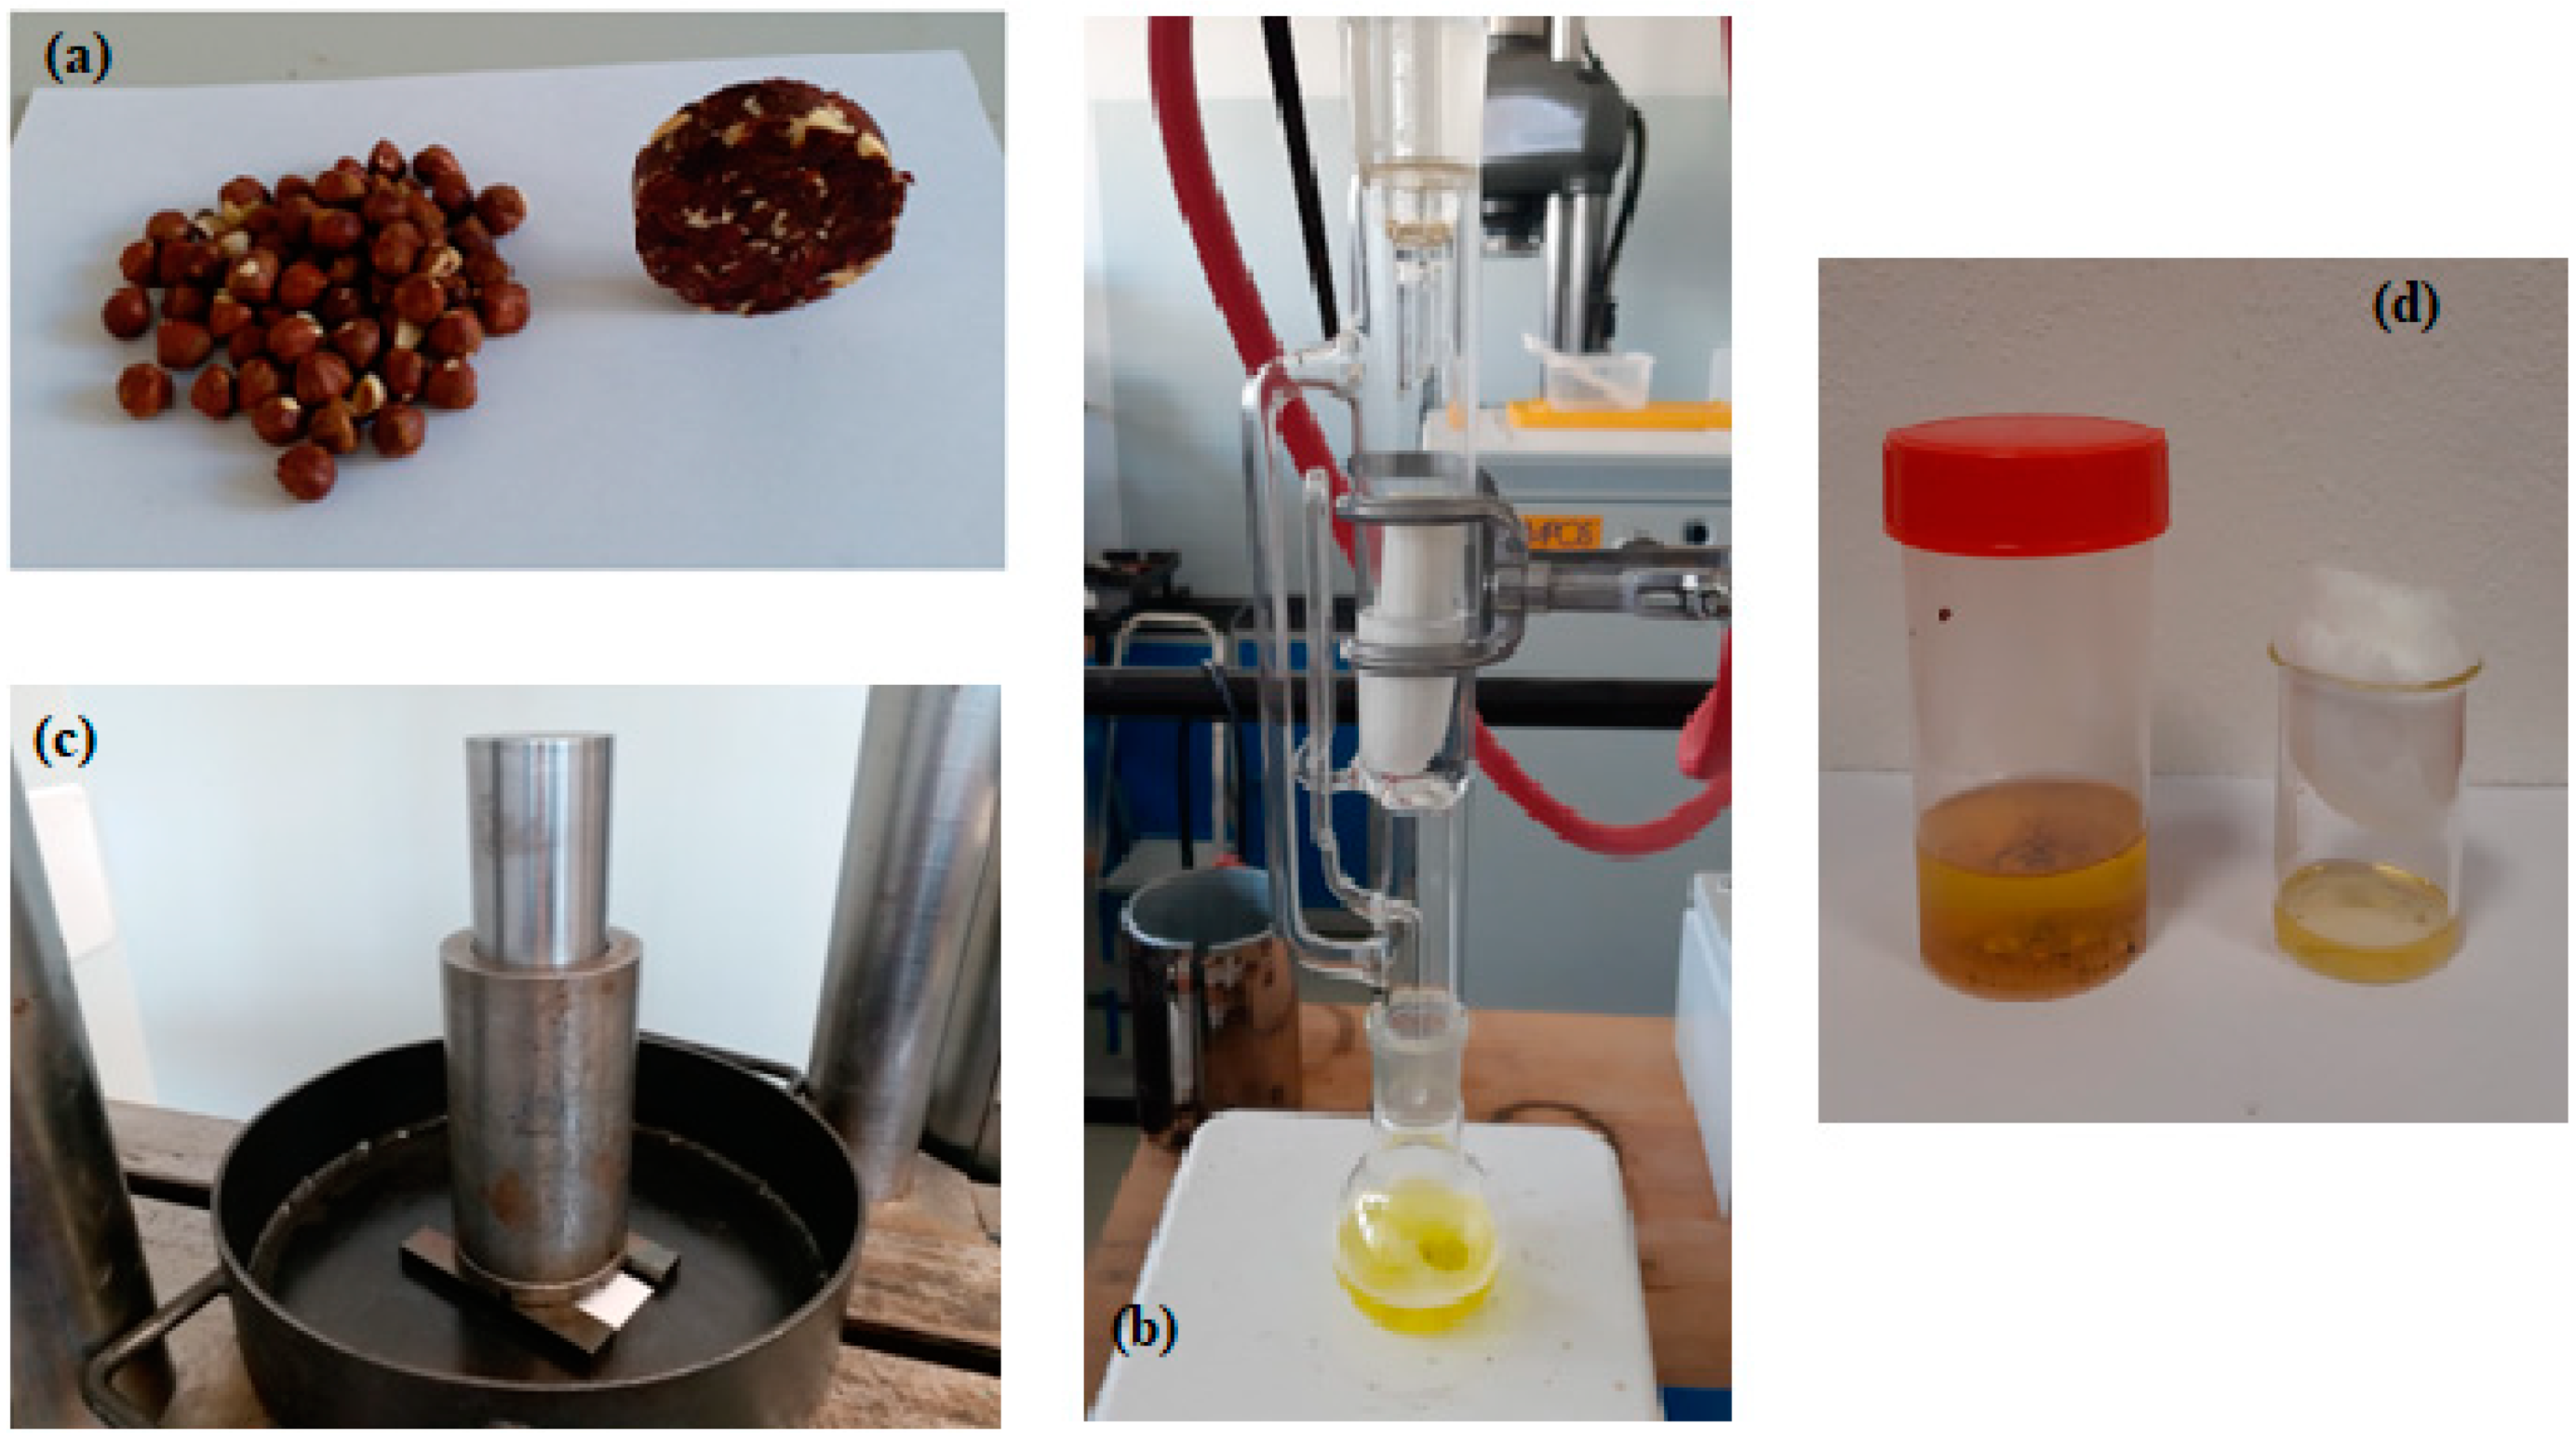 Processes | Free Full-Text | Evaluation of Postharvest Processing of  Hazelnut Kernel Oil Extraction Using Uniaxial Pressure and Organic Solvent